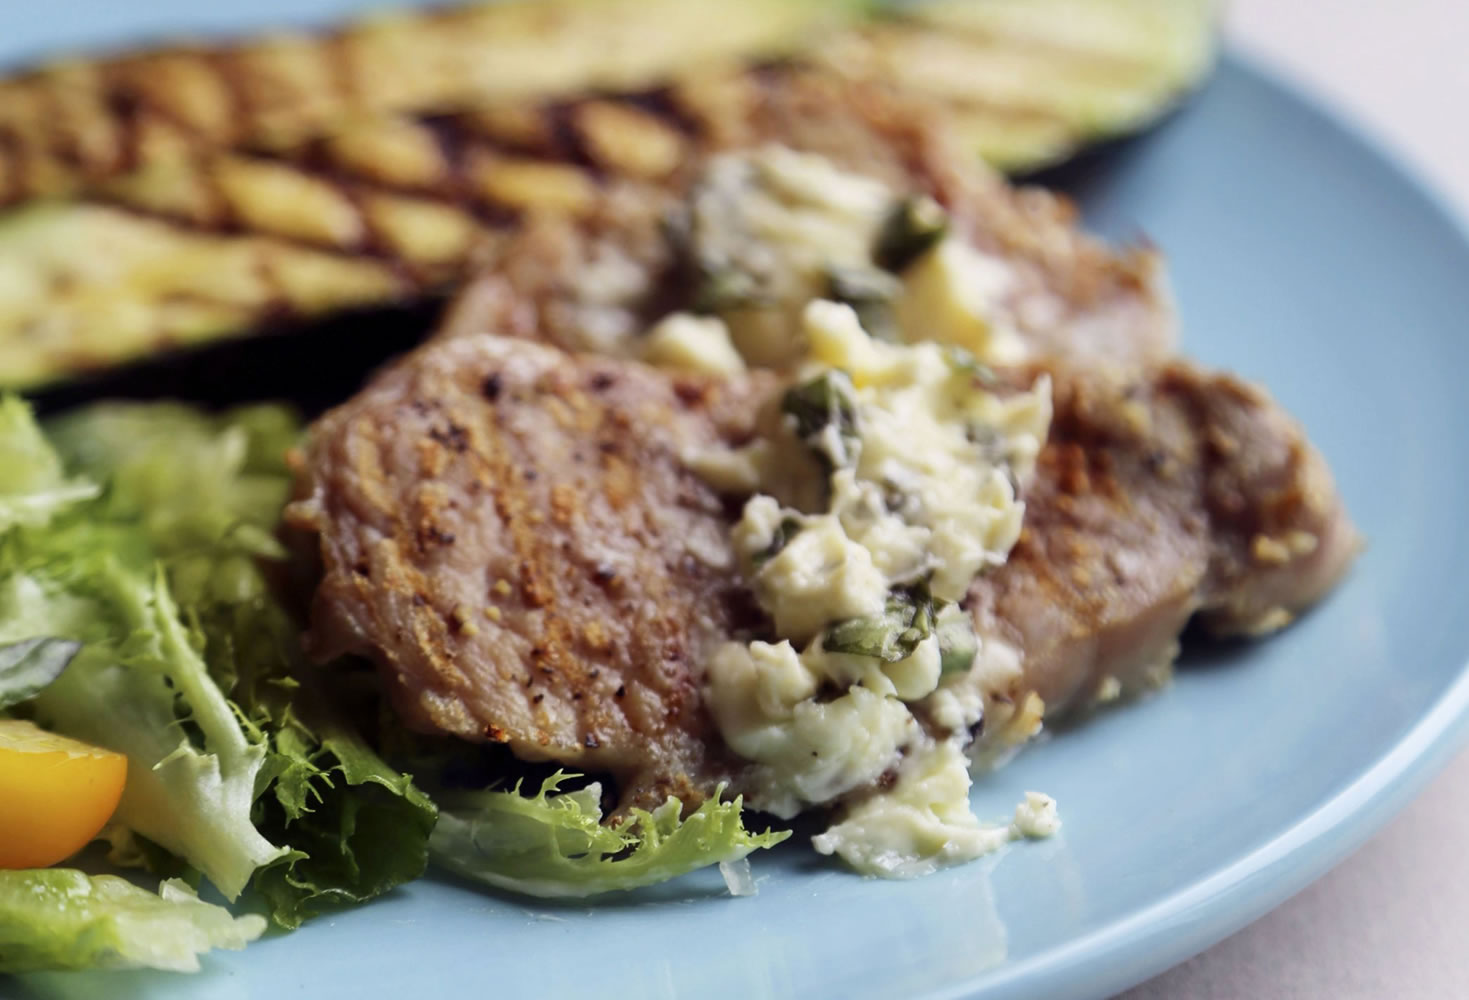 Pork Cutlets cook quickly and are accompanied by Zucchini and Oregano/Feta Butter.